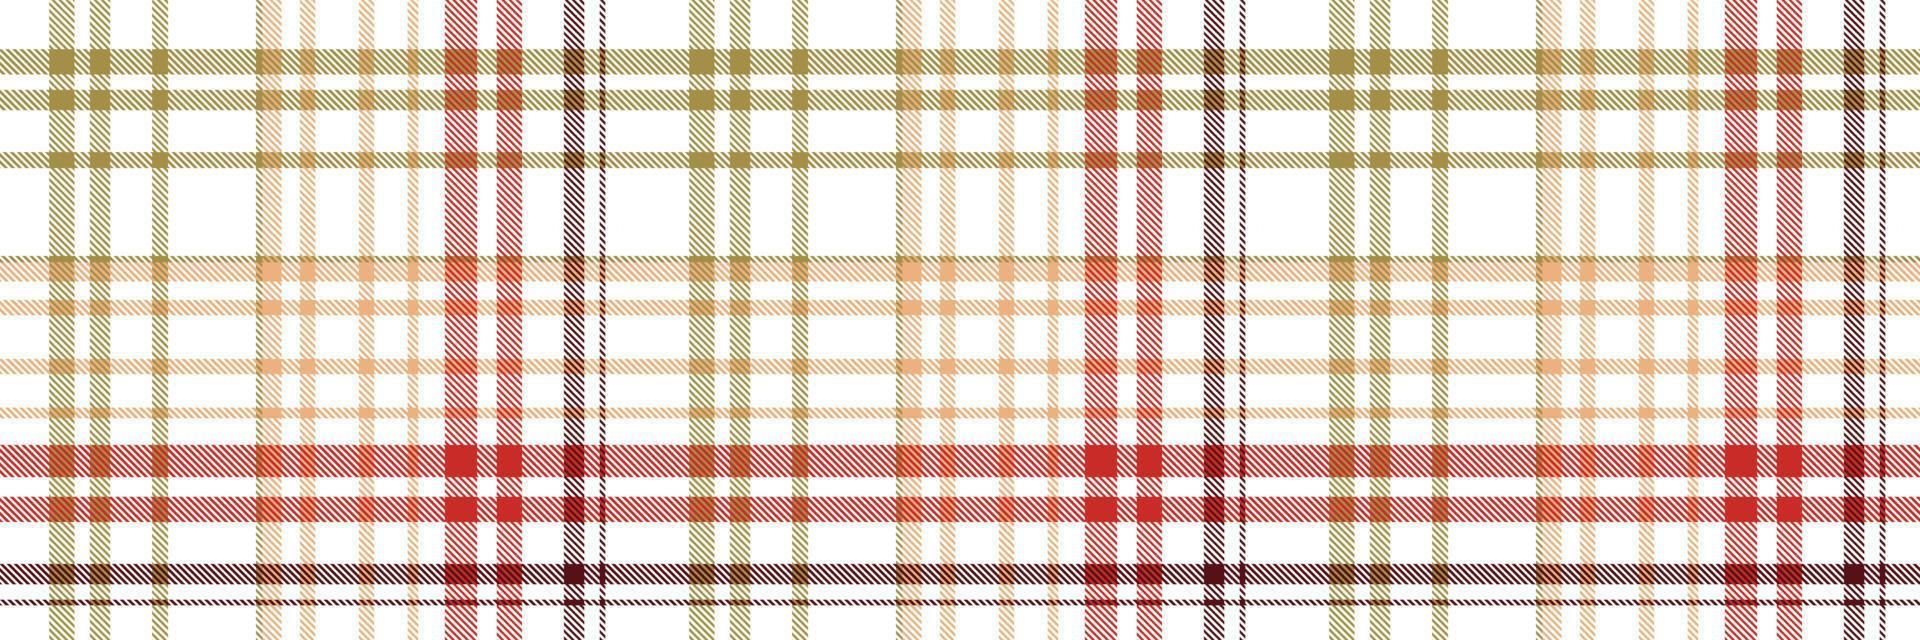 Plaid patterns  seamless is a patterned cloth consisting of criss crossed, horizontal and vertical bands in multiple colours.Seamless tartan for  scarf,pyjamas,blanket,duvet,kilt large shawl. vector